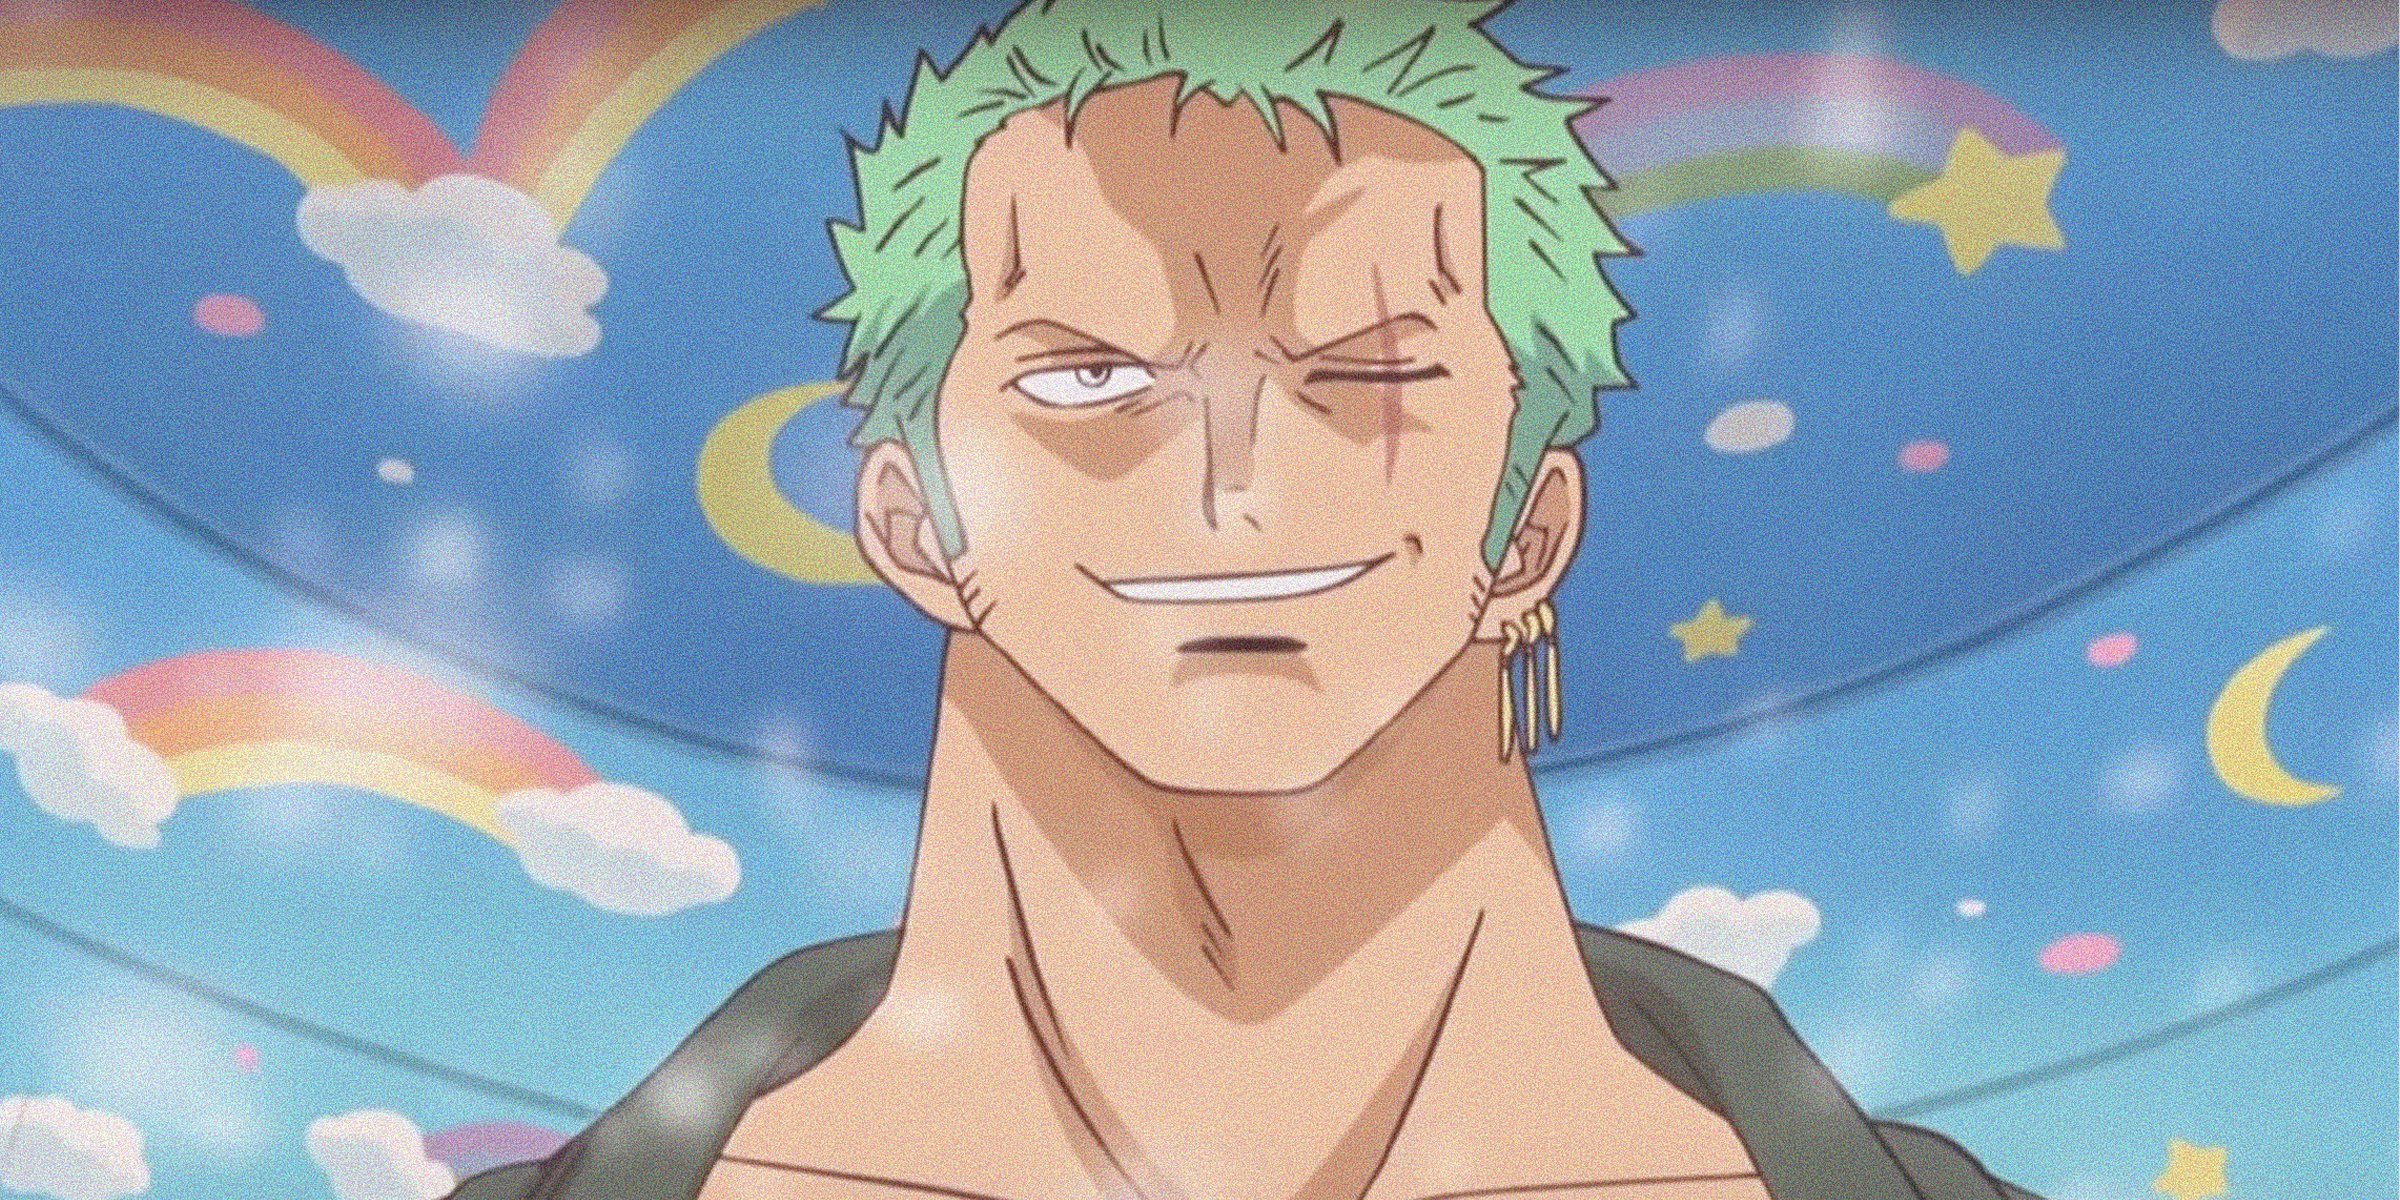 47 Roronoa Zoro Quotes: Glance into the Mind & Soul of This Former ‘One